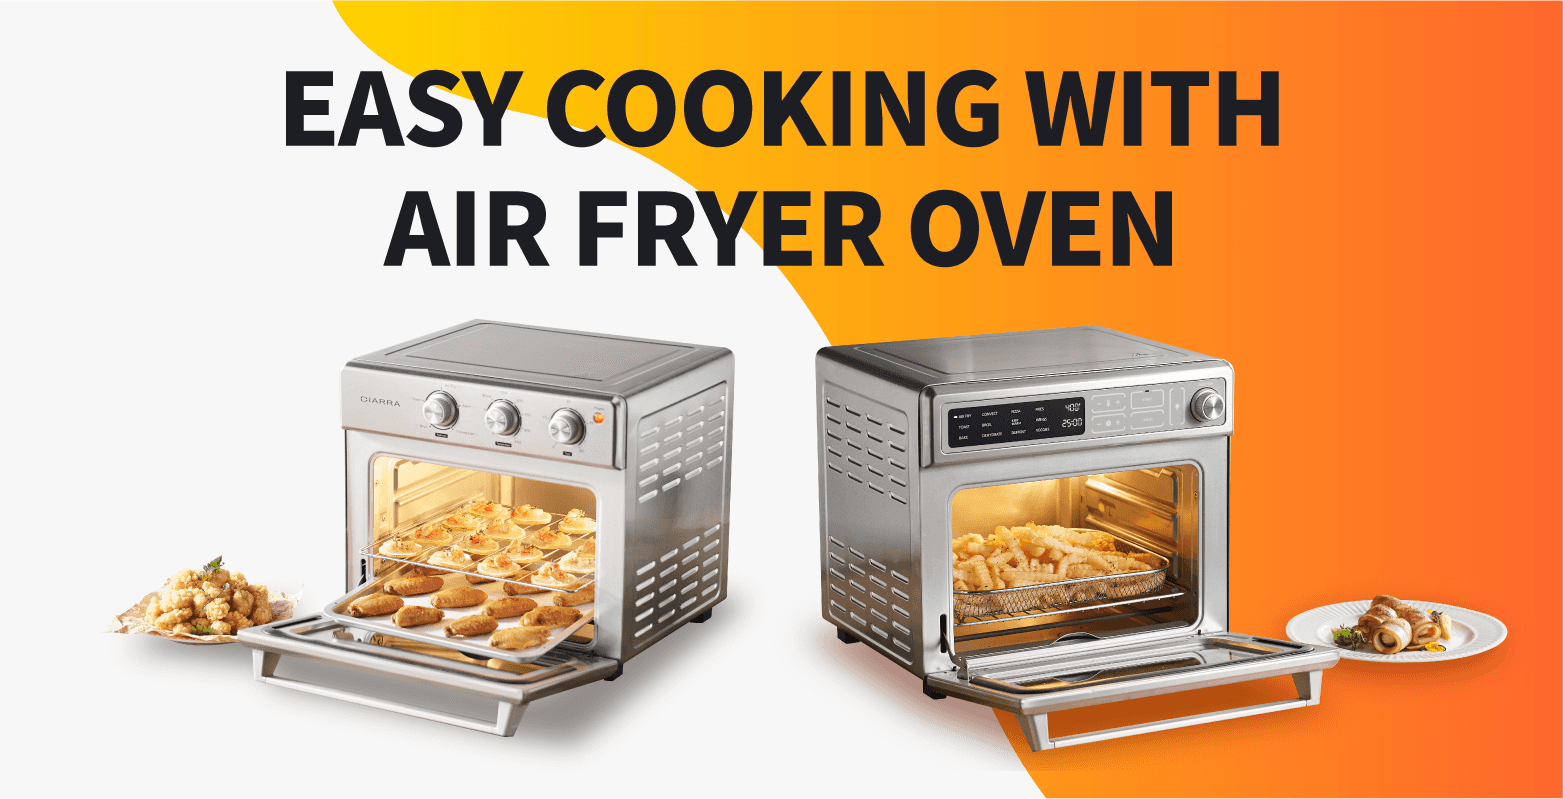 https://cdn.shopifycdn.net/s/files/1/0551/3353/6461/files/everything_you_need_to_know_about_your_air_fryer_oven-1.png?v=1635411549